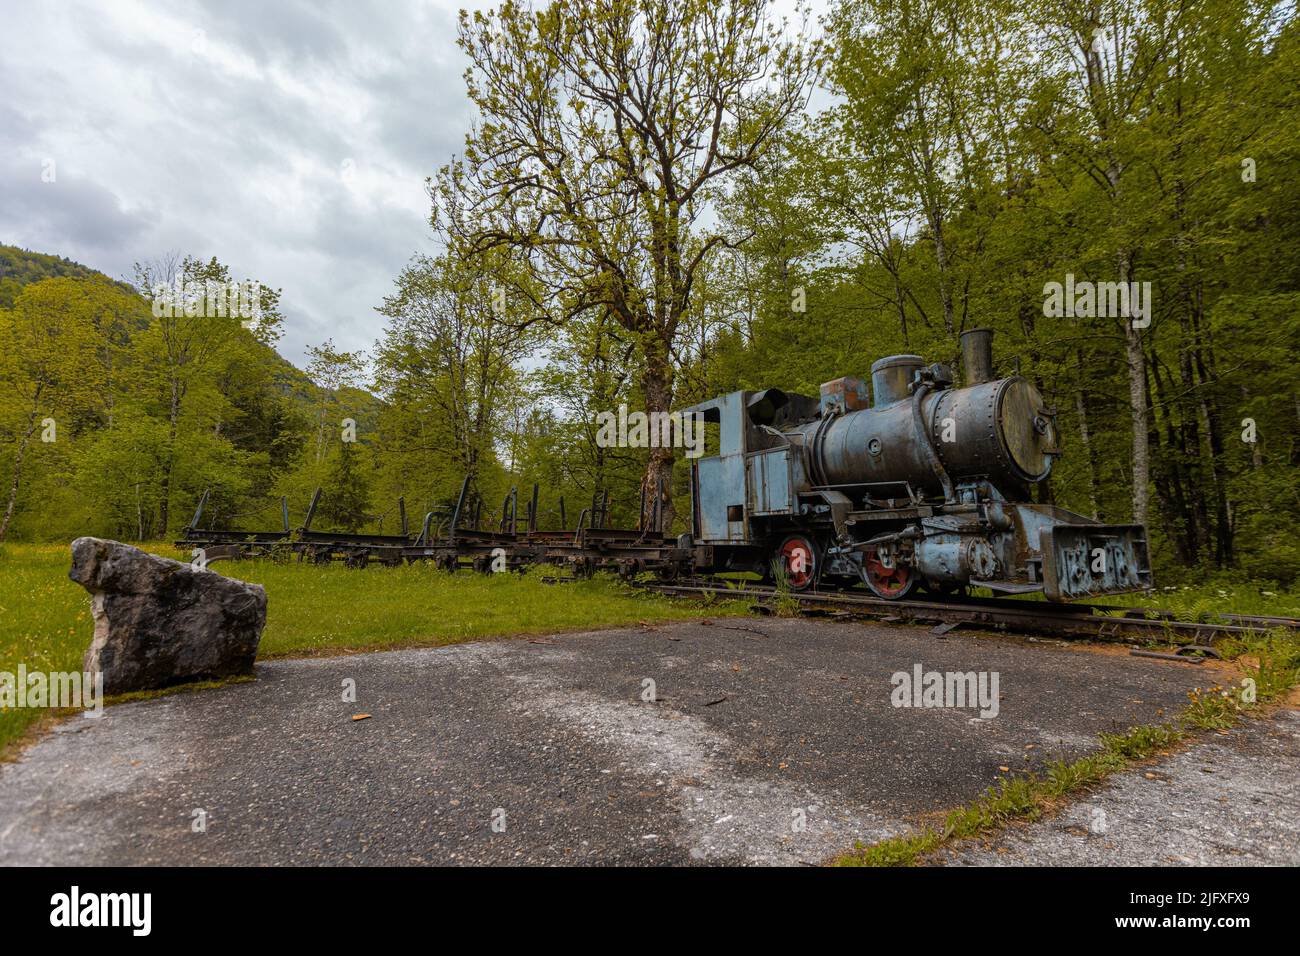 Waldbahn Reichraming, old museum narrow gauge railway close to Reichraming, Austria. View of the steam engine and a row of wagons behind. Stock Photo